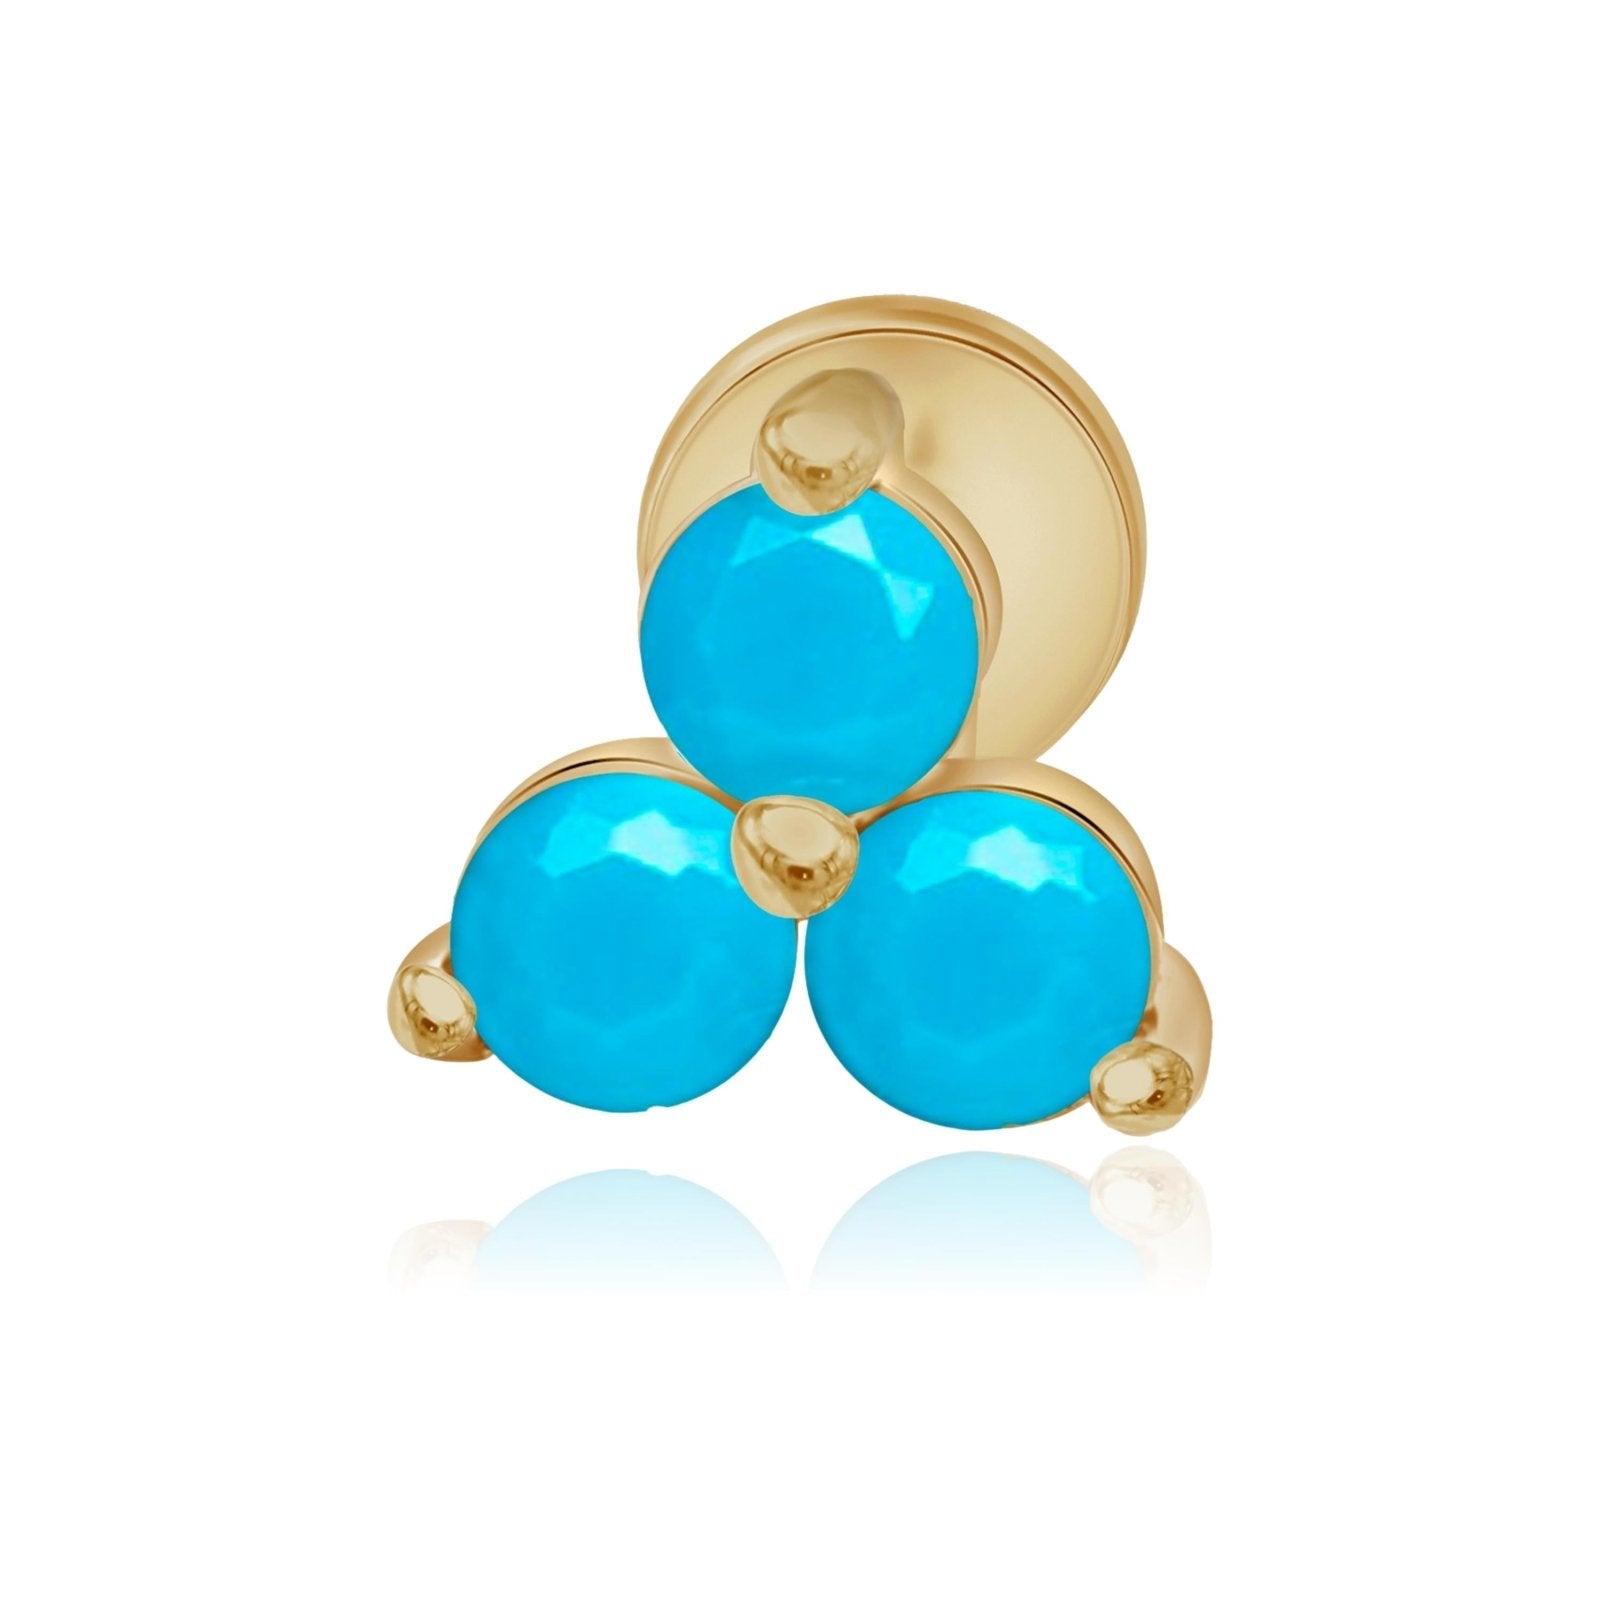 Turquoise Trinity Cluster Flat Back Earring Earrings Estella Collection #product_description# 18133 14k Birthstone Cartilage Earring #tag4# #tag5# #tag6# #tag7# #tag8# #tag9# #tag10# 5MM